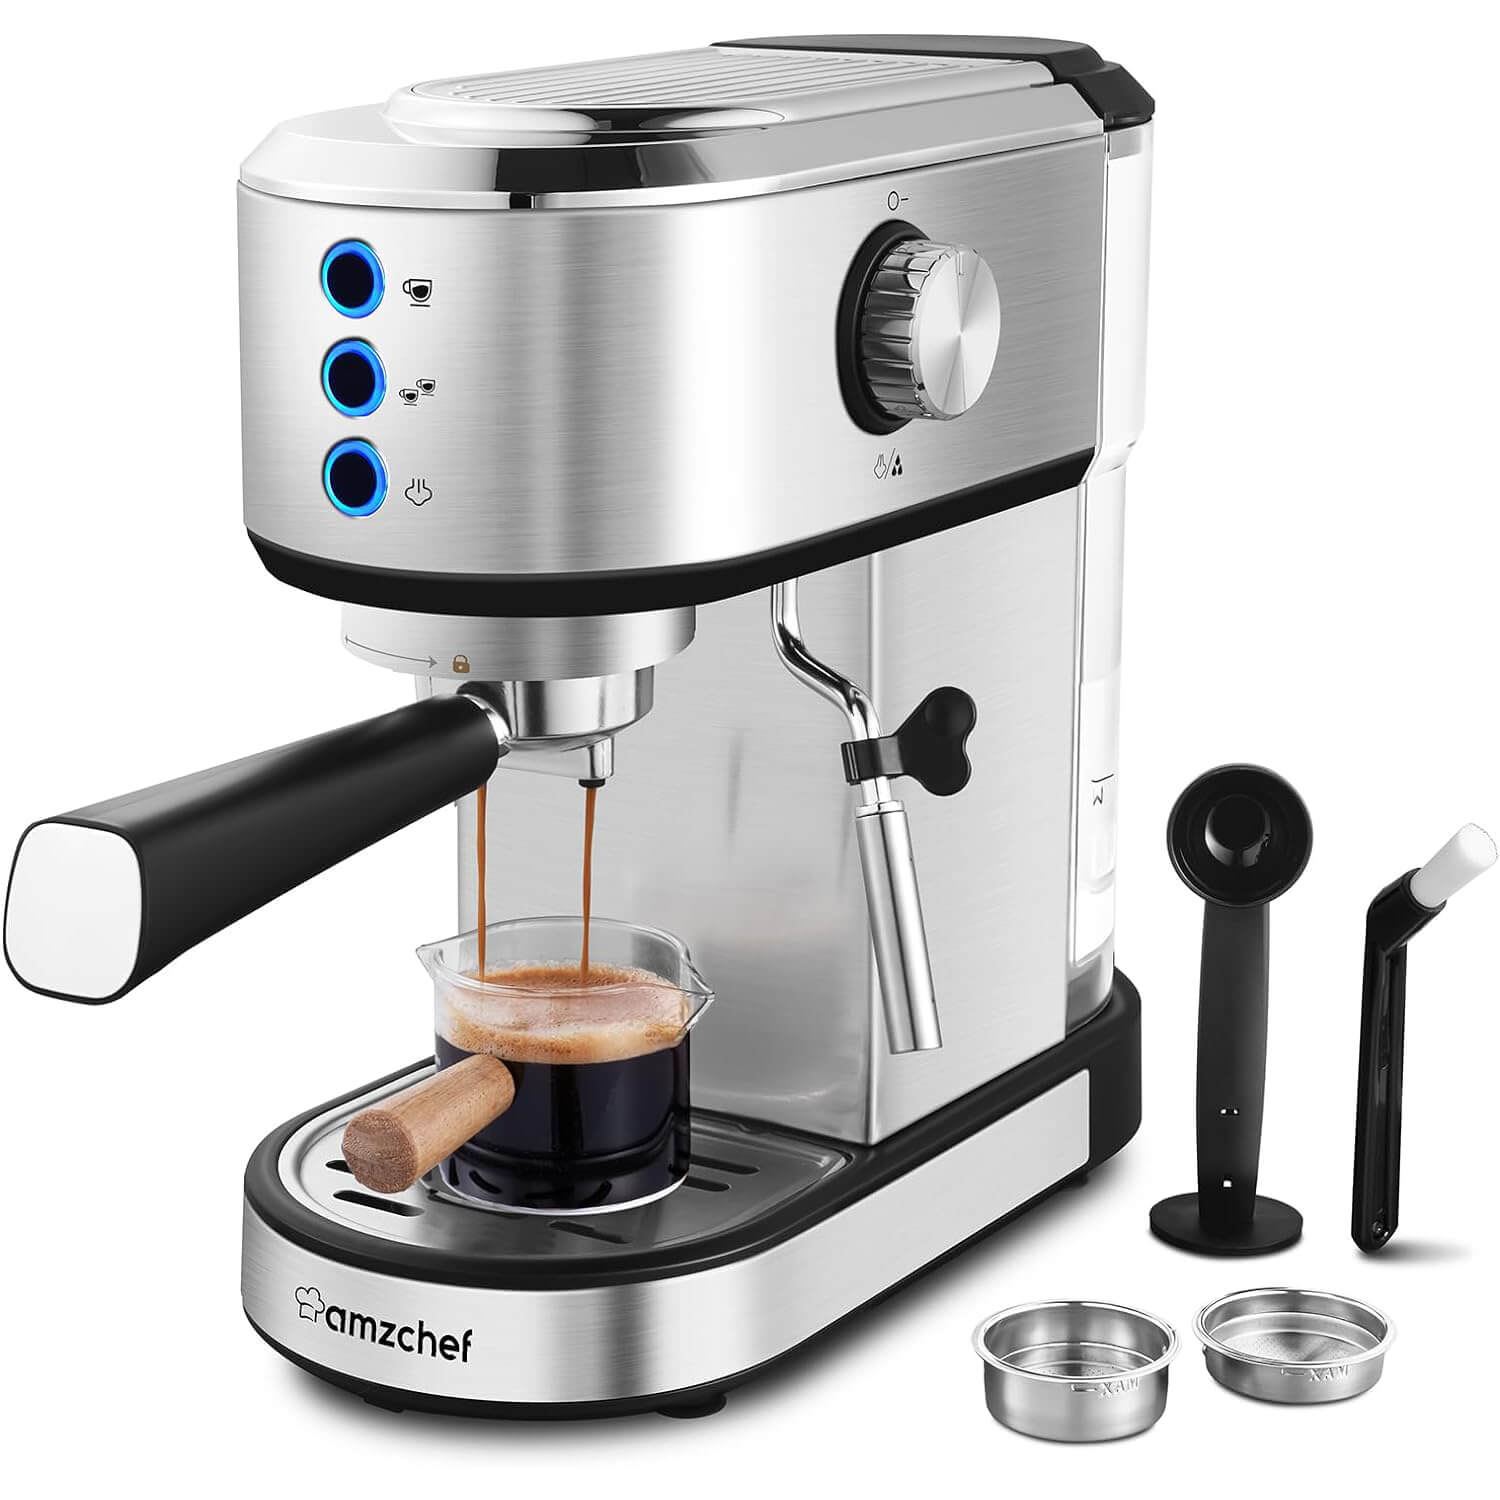 Espresso Machine 20 Bar Expresso Coffee Maker with Milk Frother